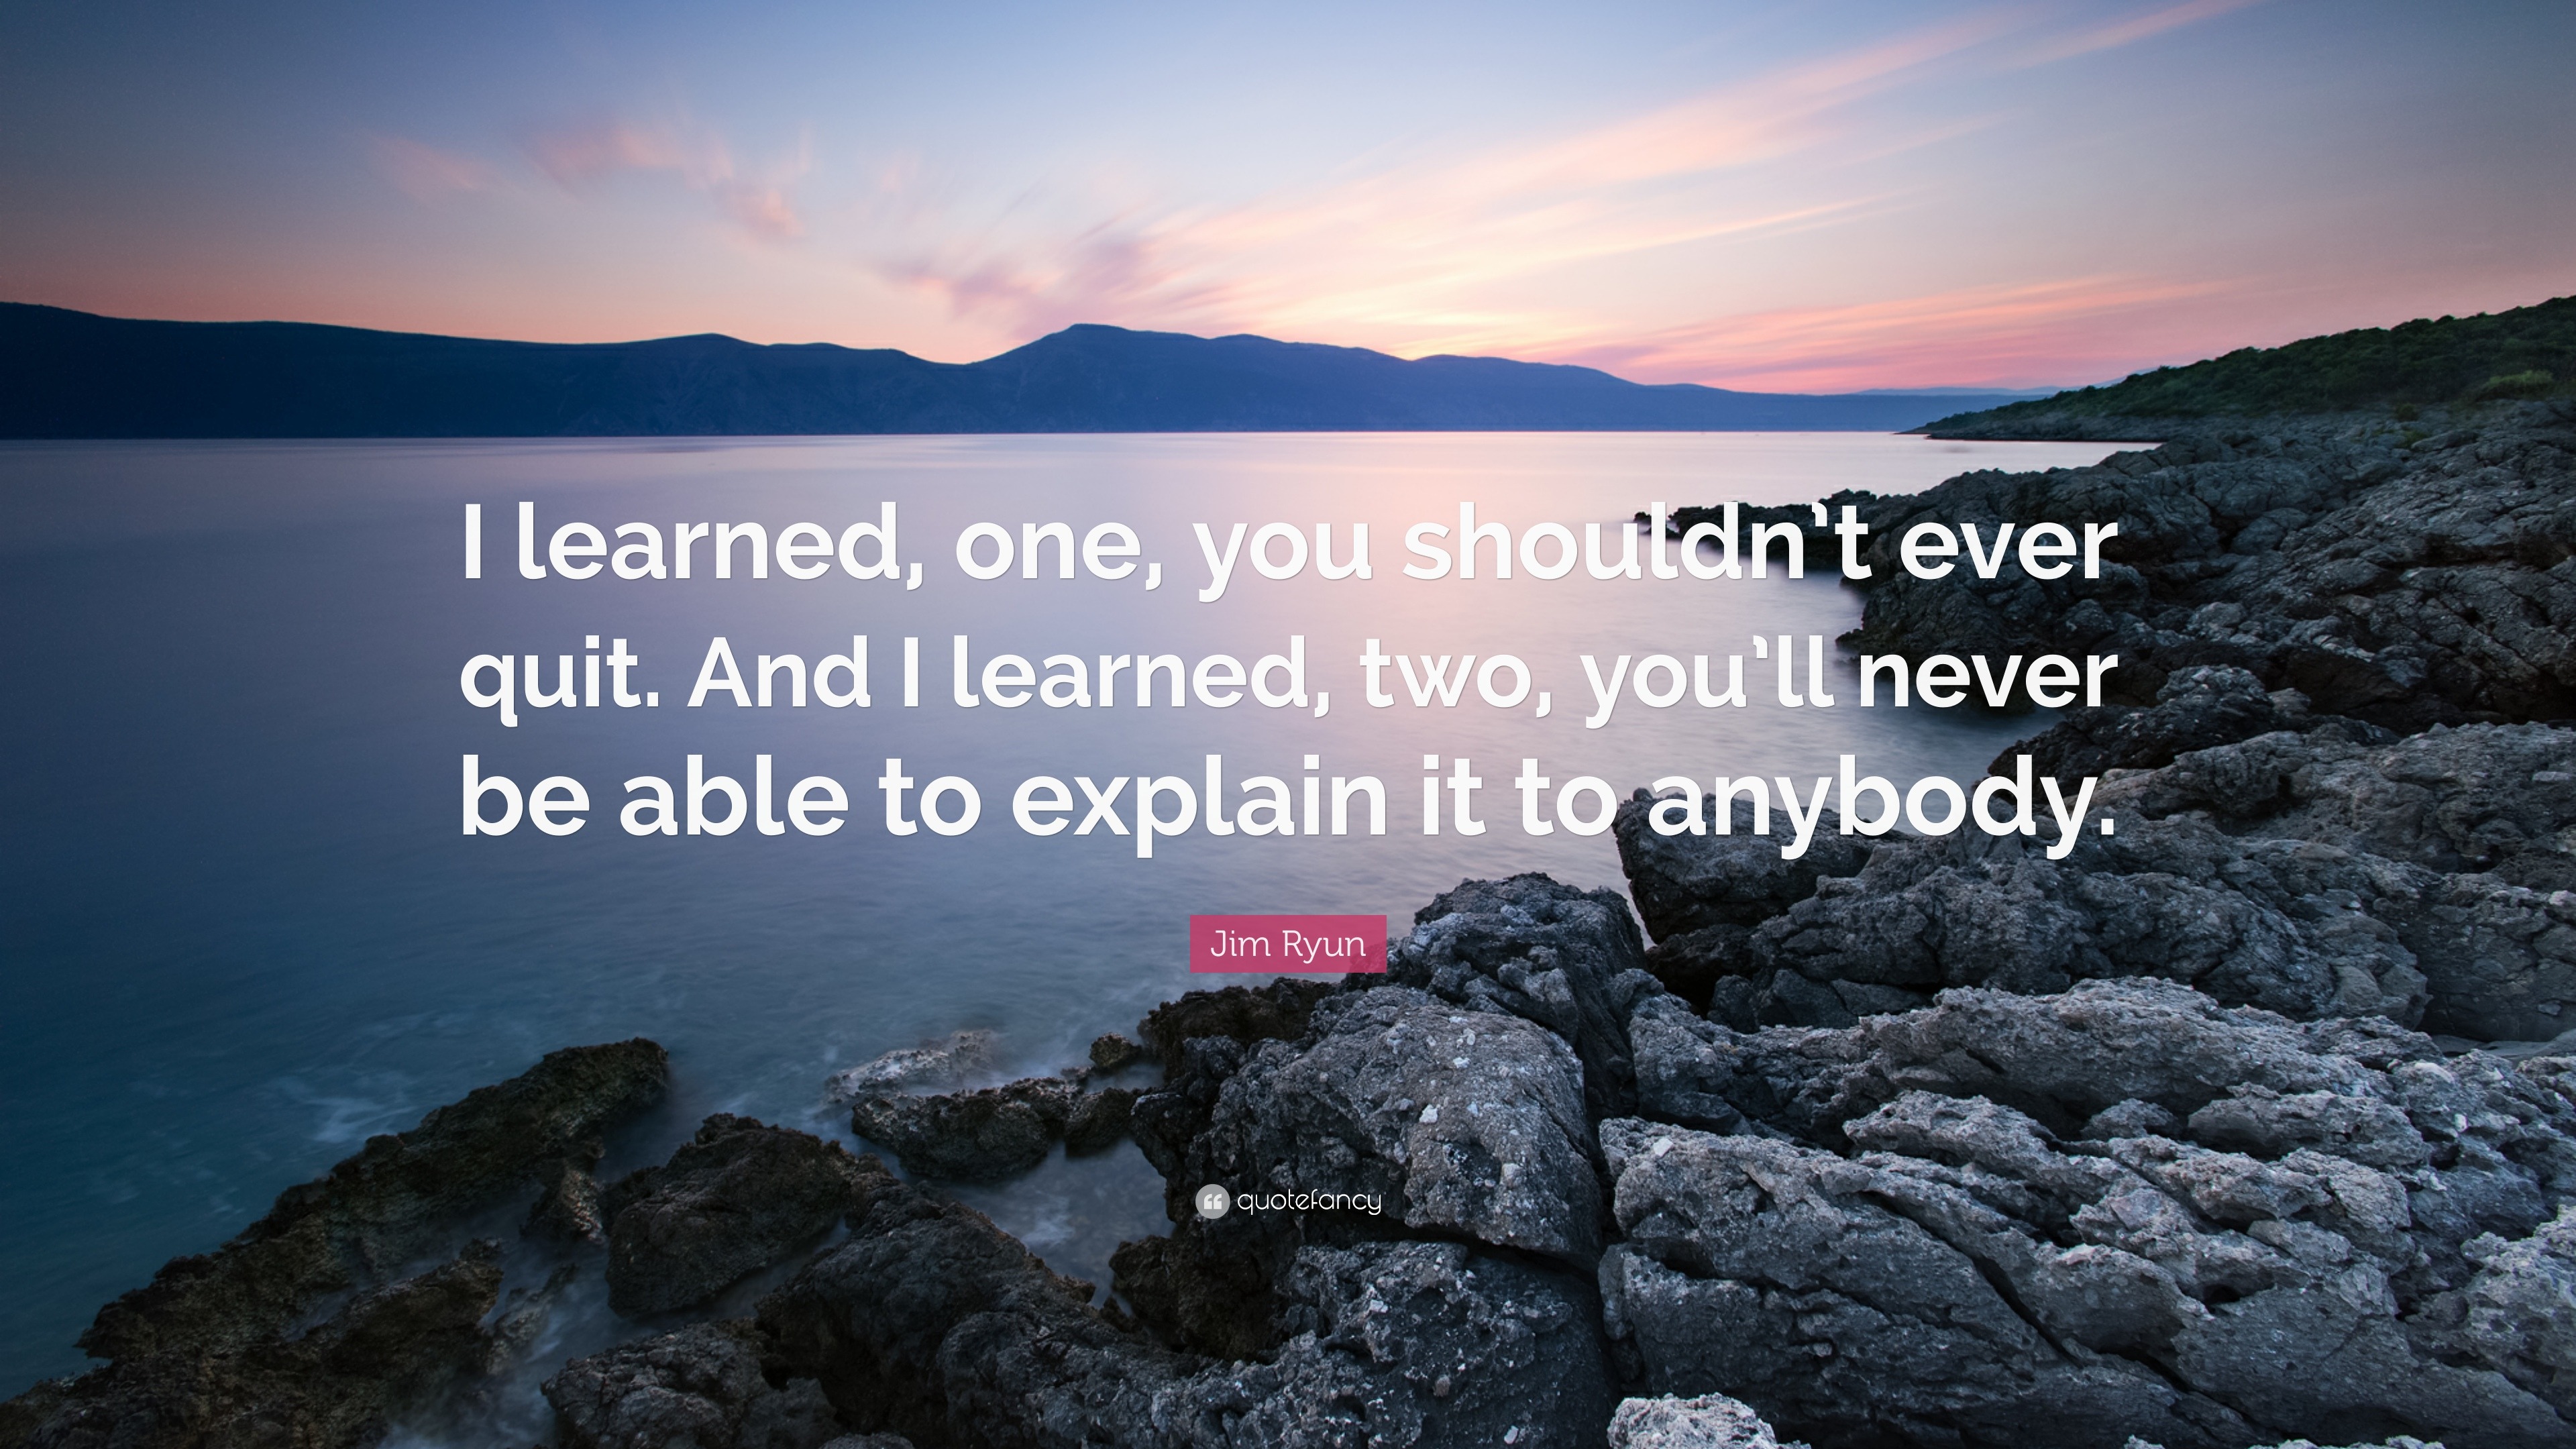 Jim Ryun Quote: “I learned, one, you shouldn't ever quit. And I ...